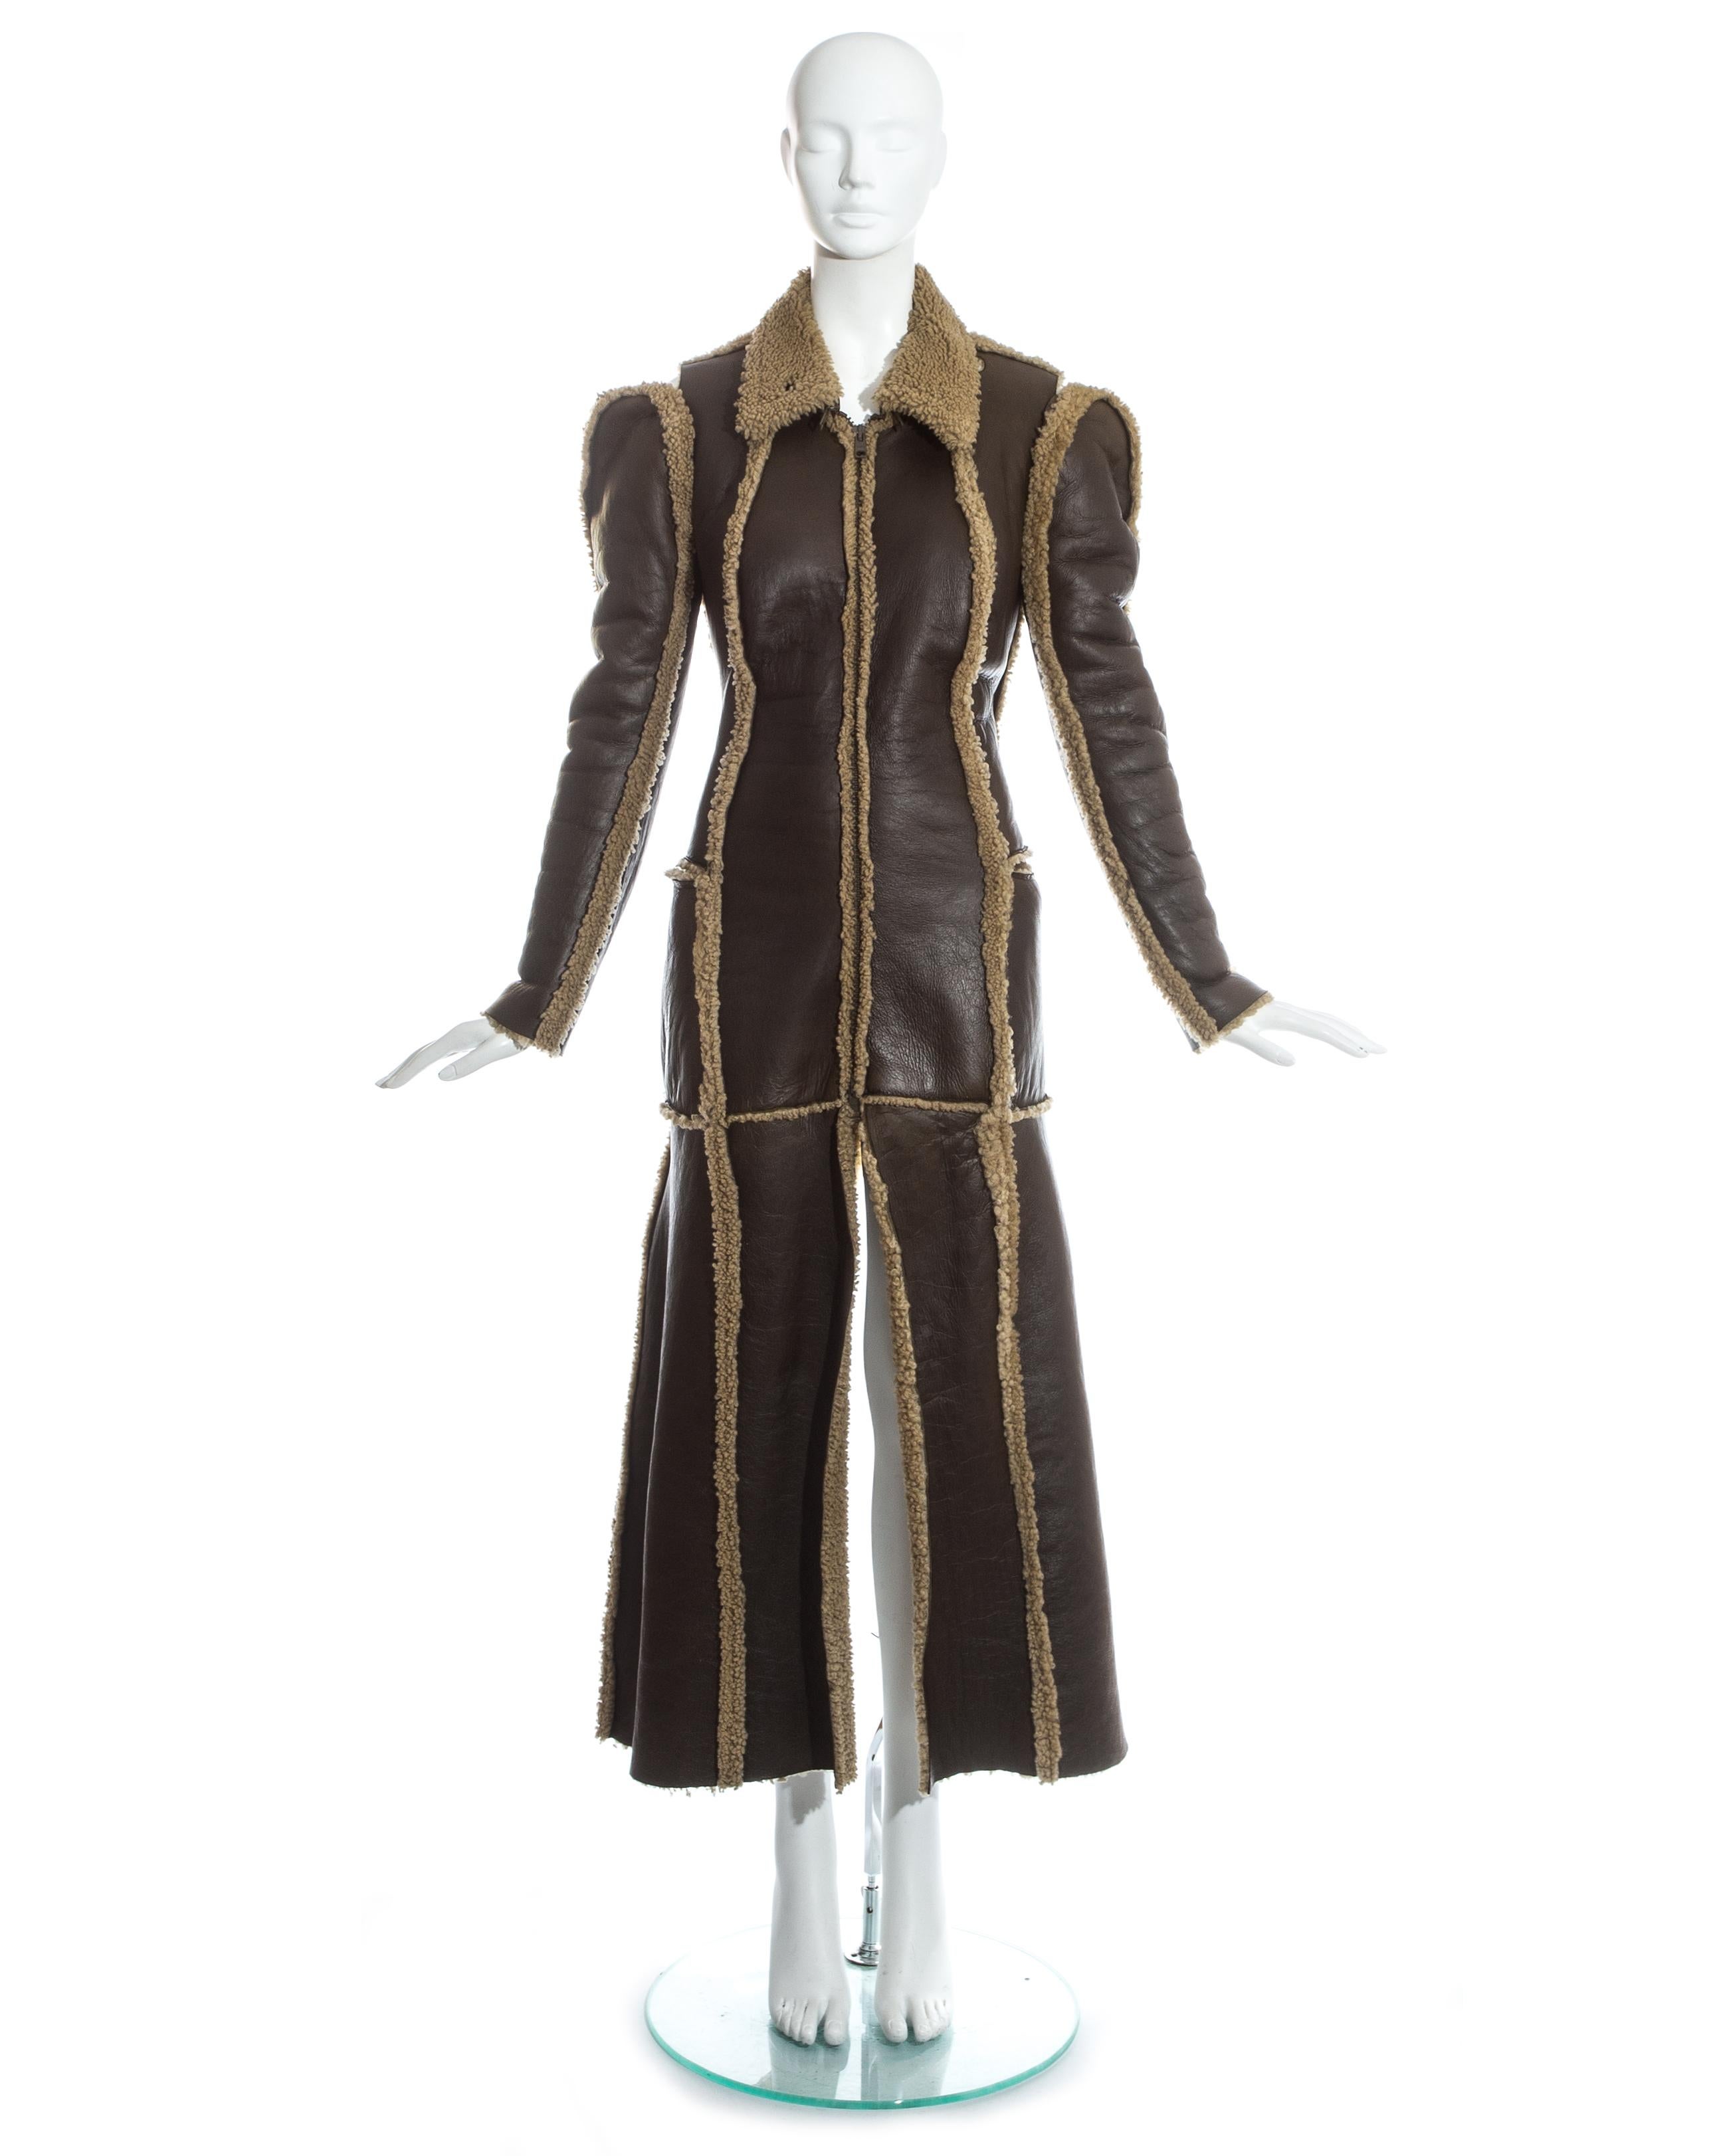 Martin Margiela; brown leather and shearling 'flat collection' maxi coat. Inverted seams, zip closures, two front patch pockets and detachable collar. Openings on the shoulder attached to an internal large elastic band with velcro fastening.